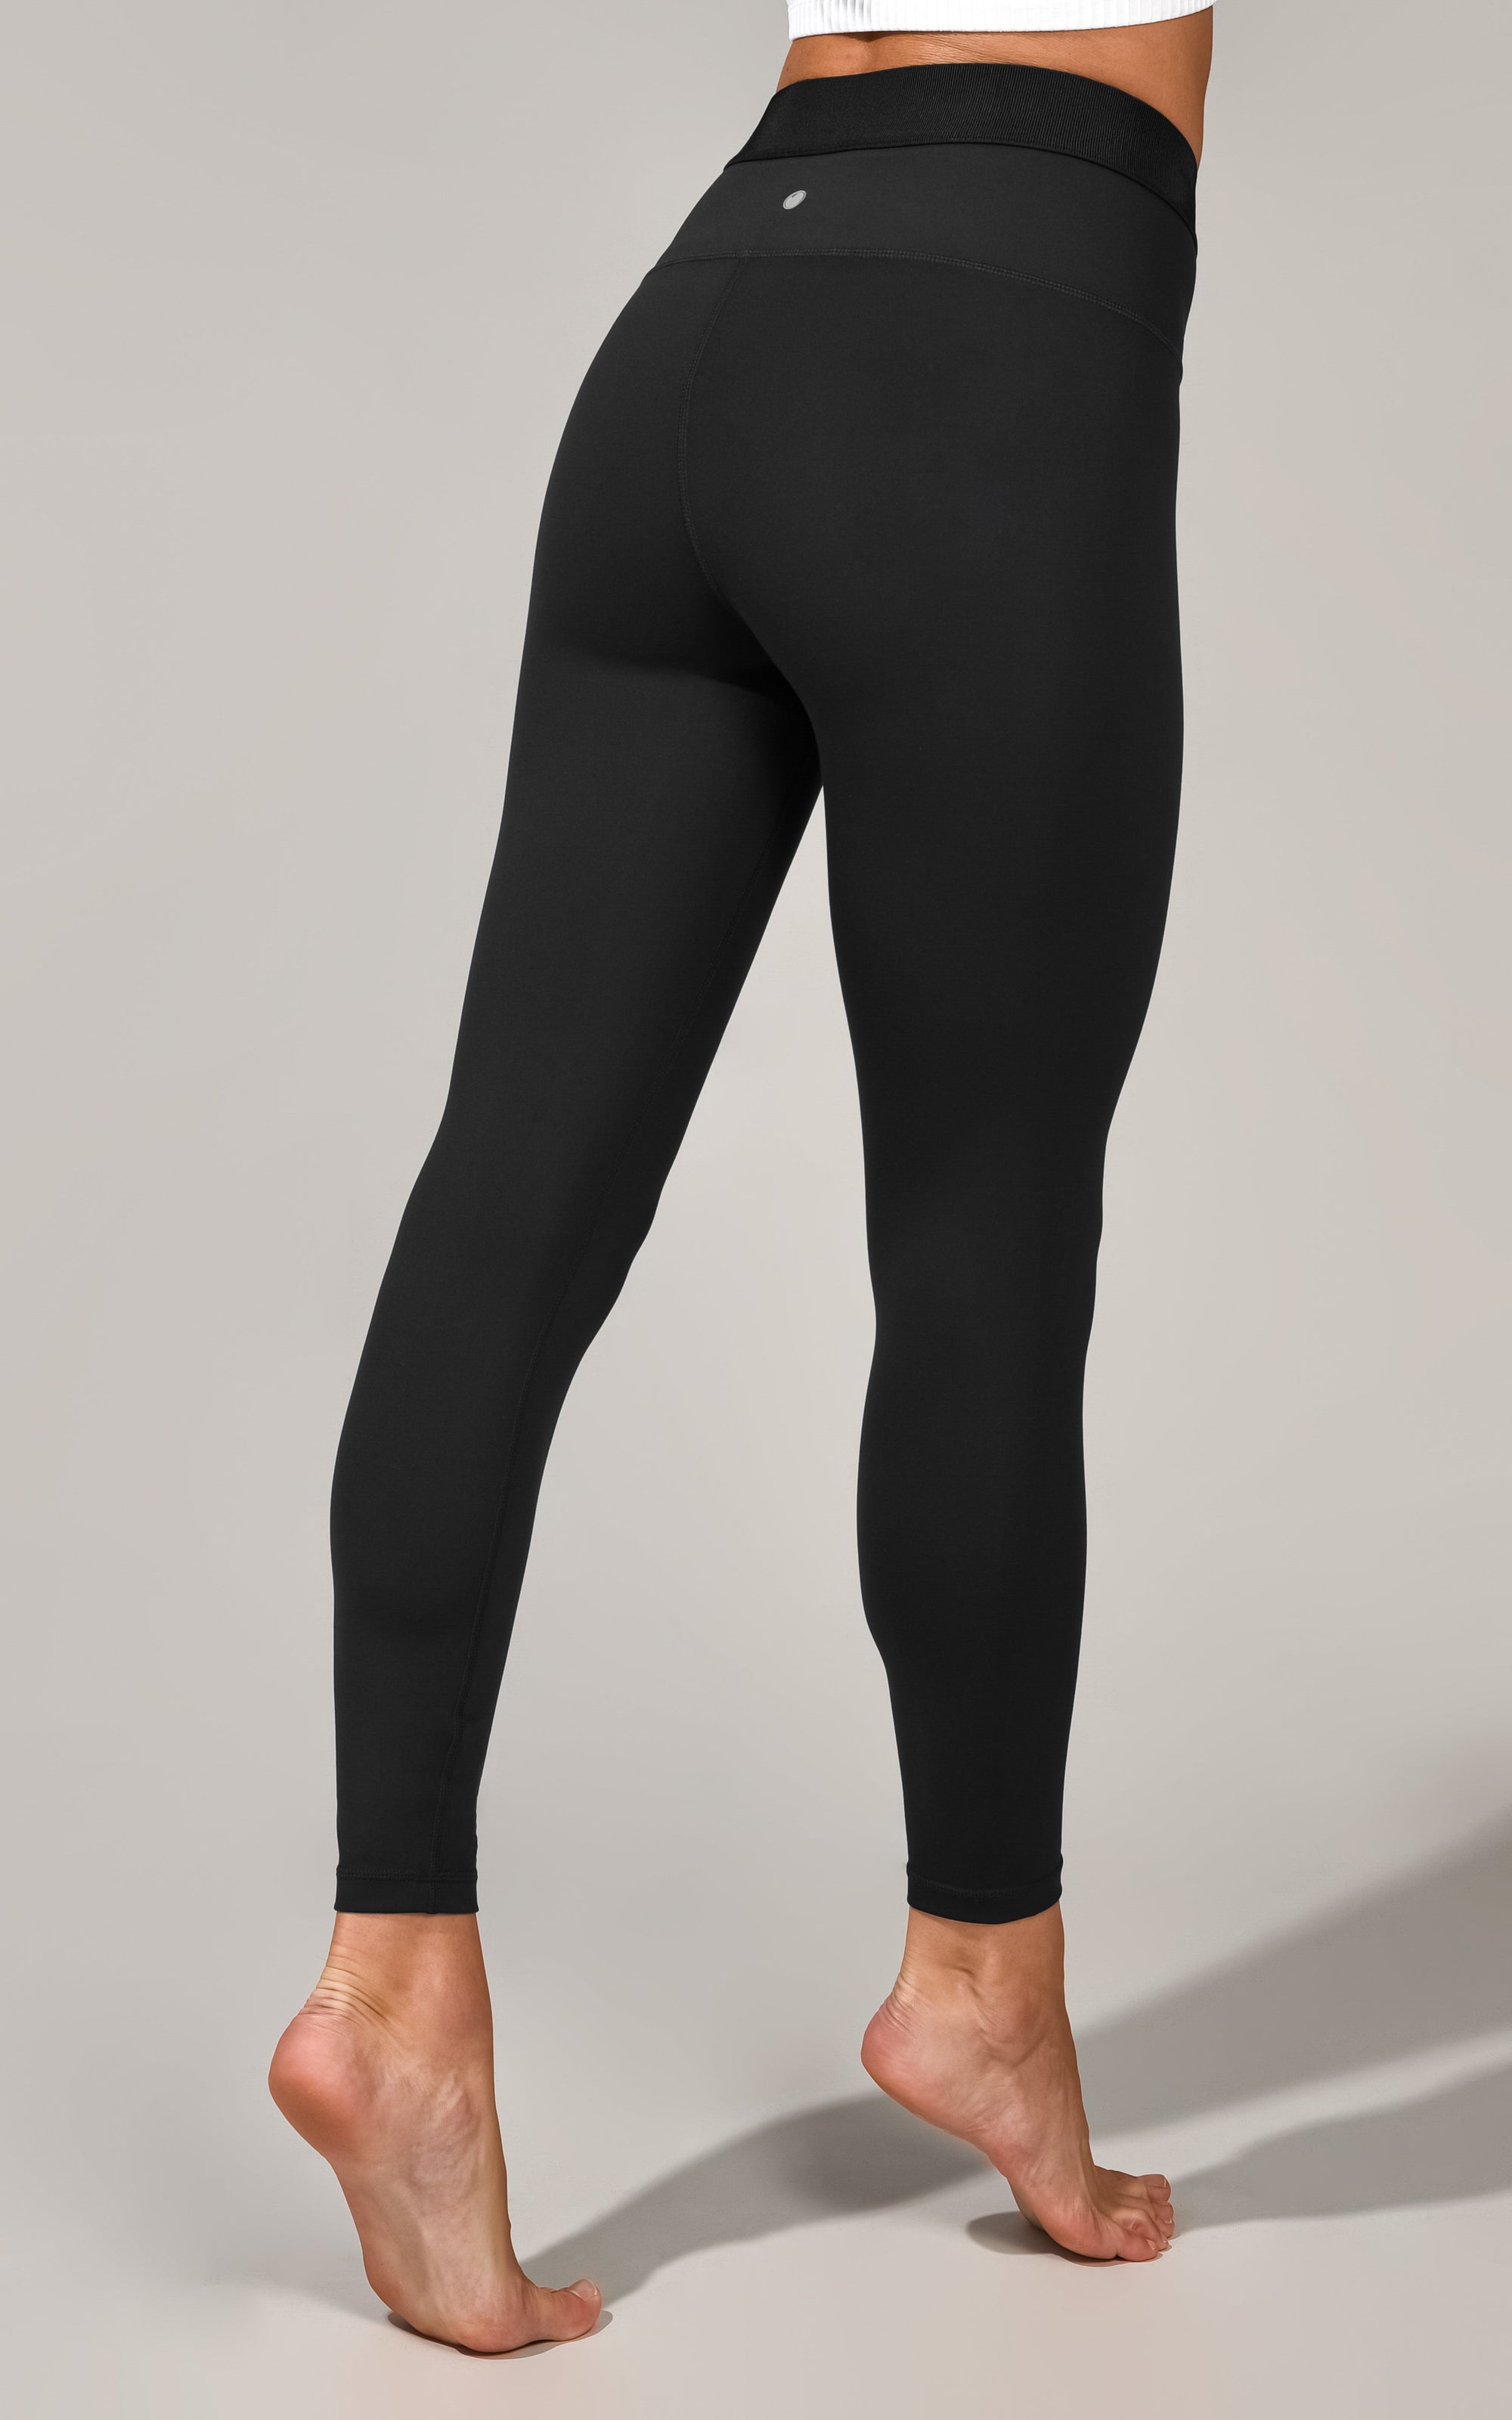 Yogalicious Black Cropped Leggings XS Mid Rise Yoga Athleisure Activewear -  $14 - From Audrey